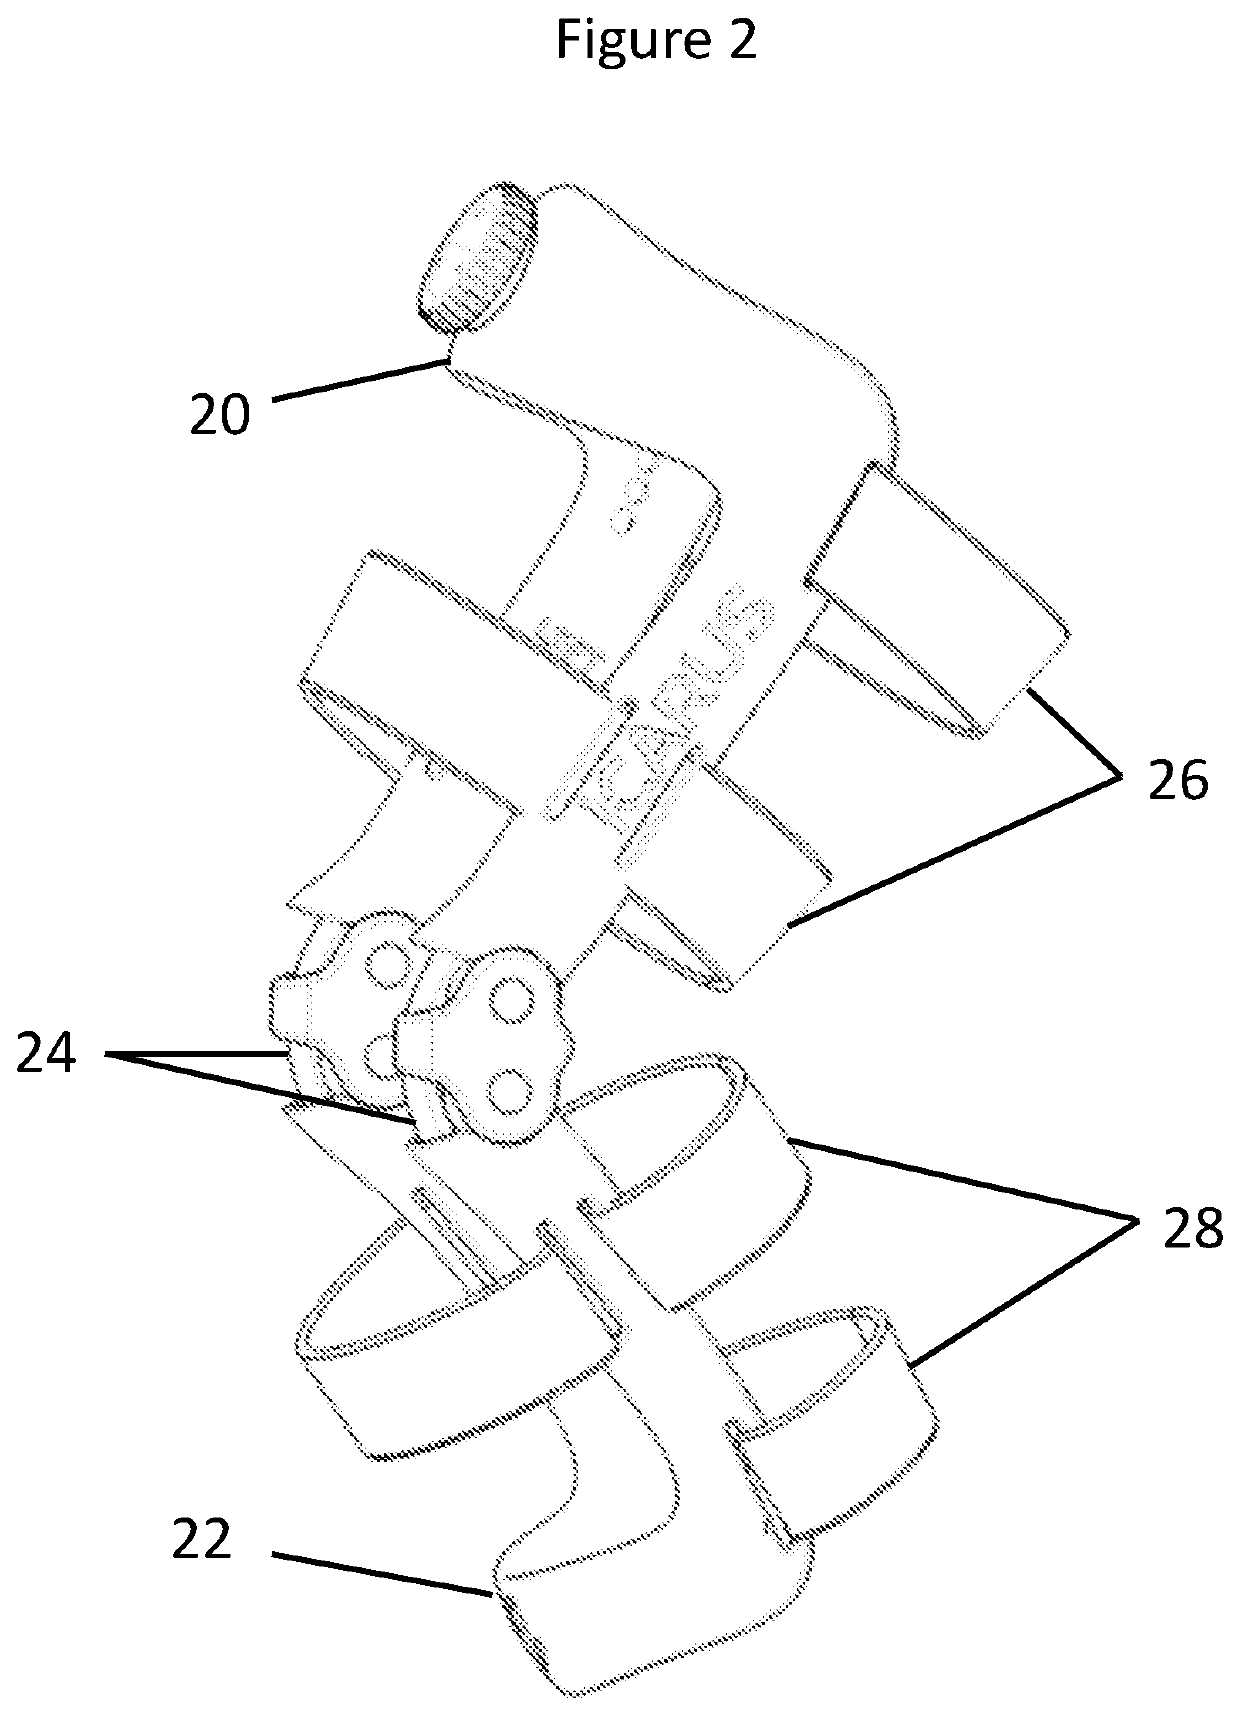 Load distribution device for preventing orthosis migration